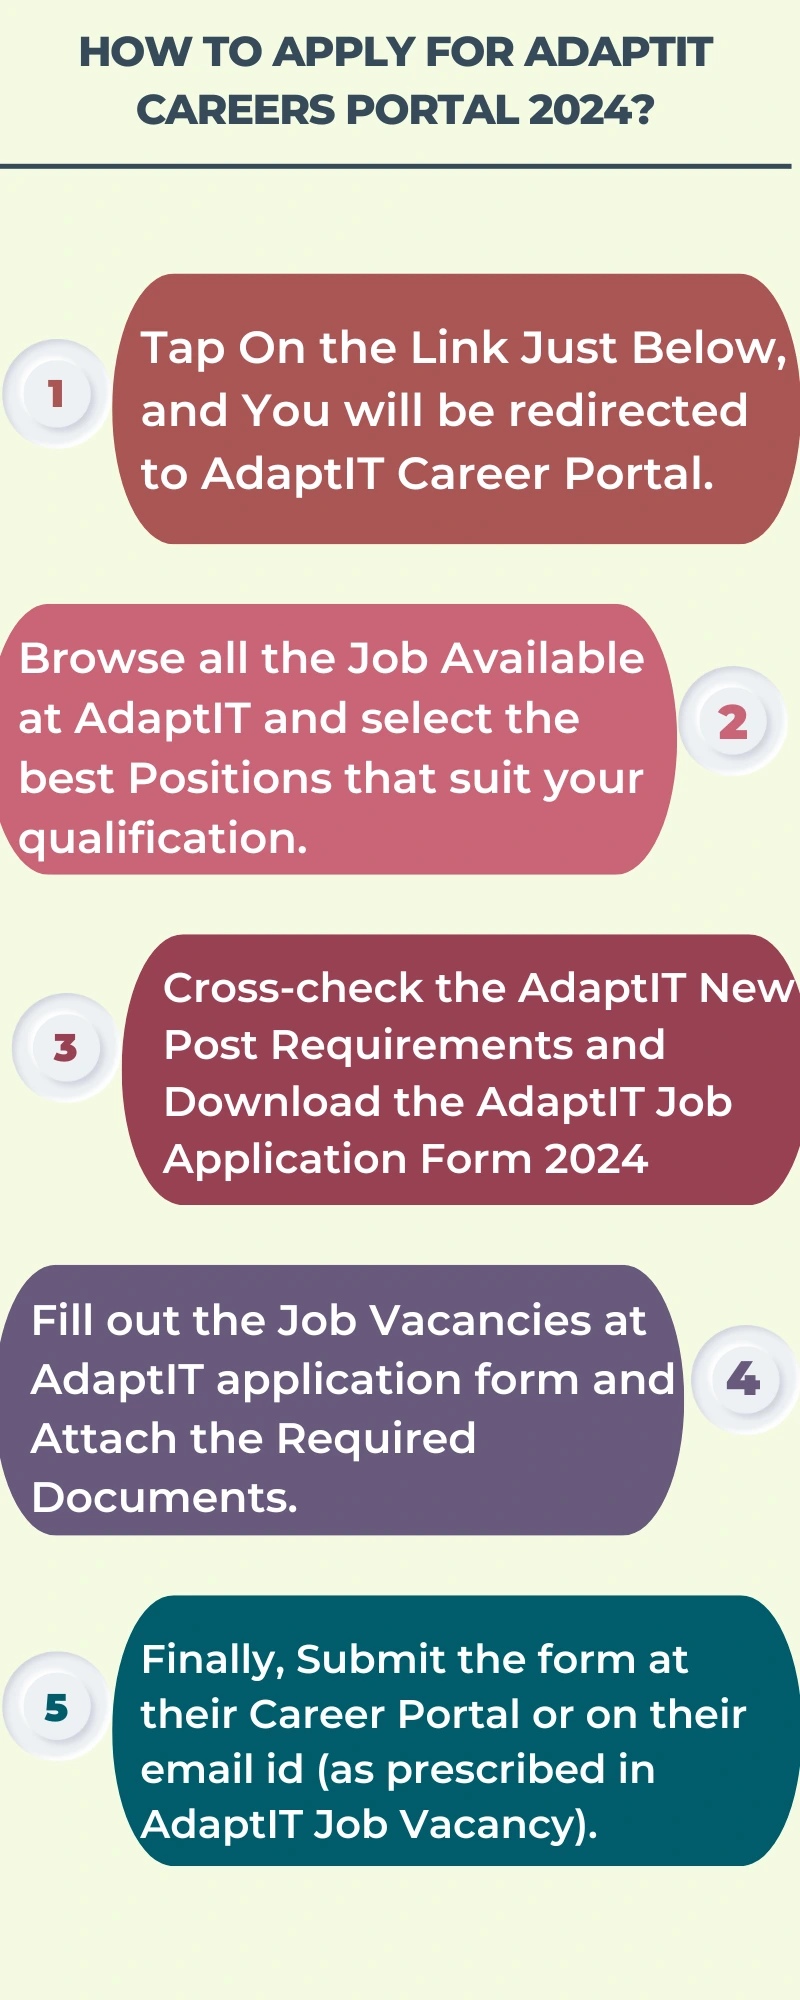 How To Apply for AdaptIT Careers Portal 2024?